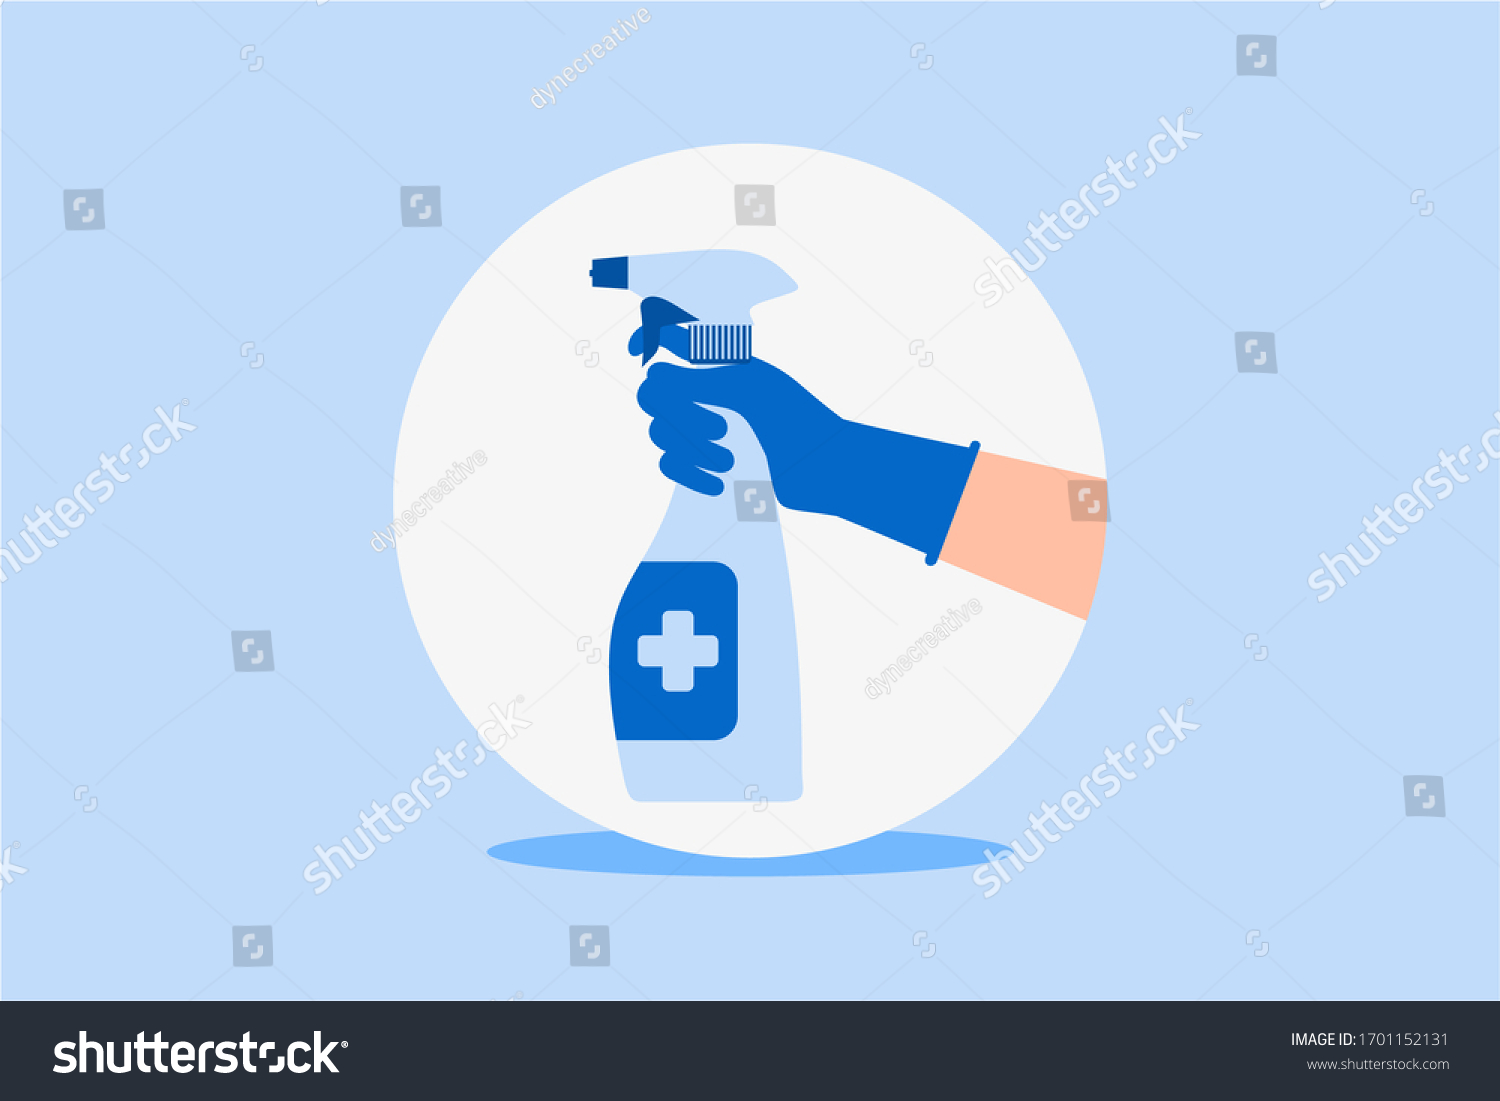 23,813 Using disinfectant Images, Stock Photos & Vectors | Shutterstock